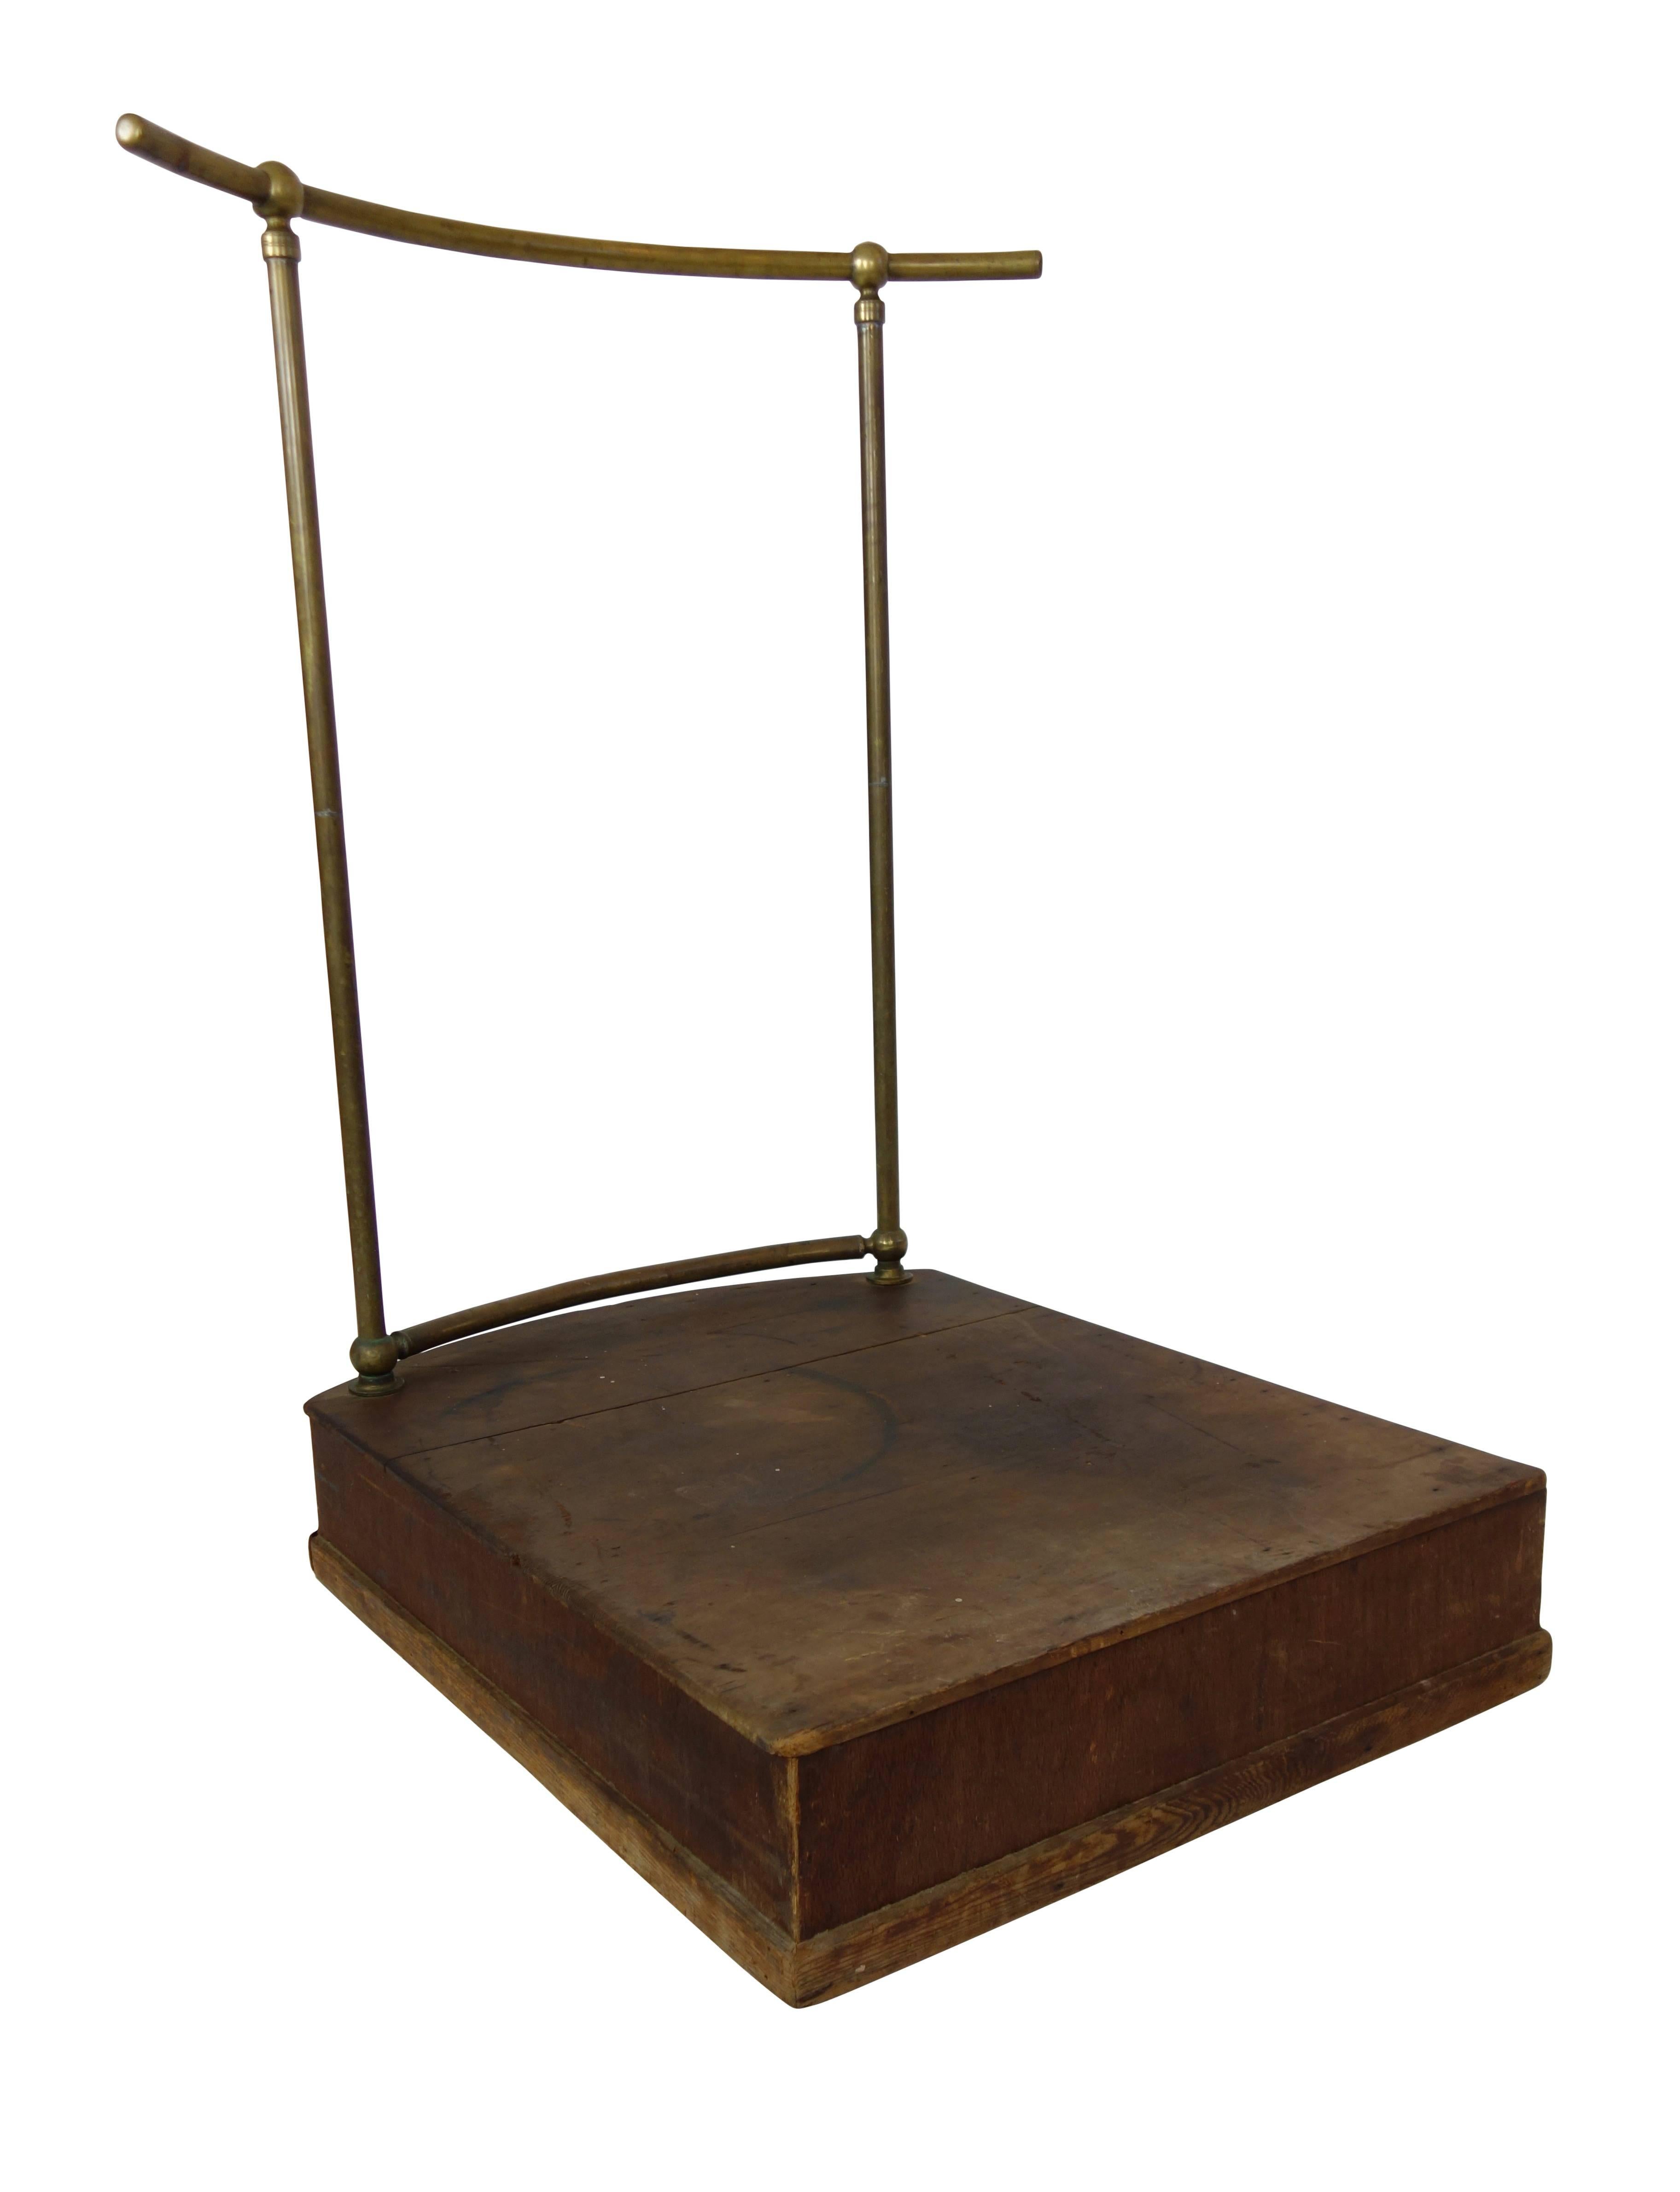 This is an early 20th century conductors podium with nickeled brass bar.